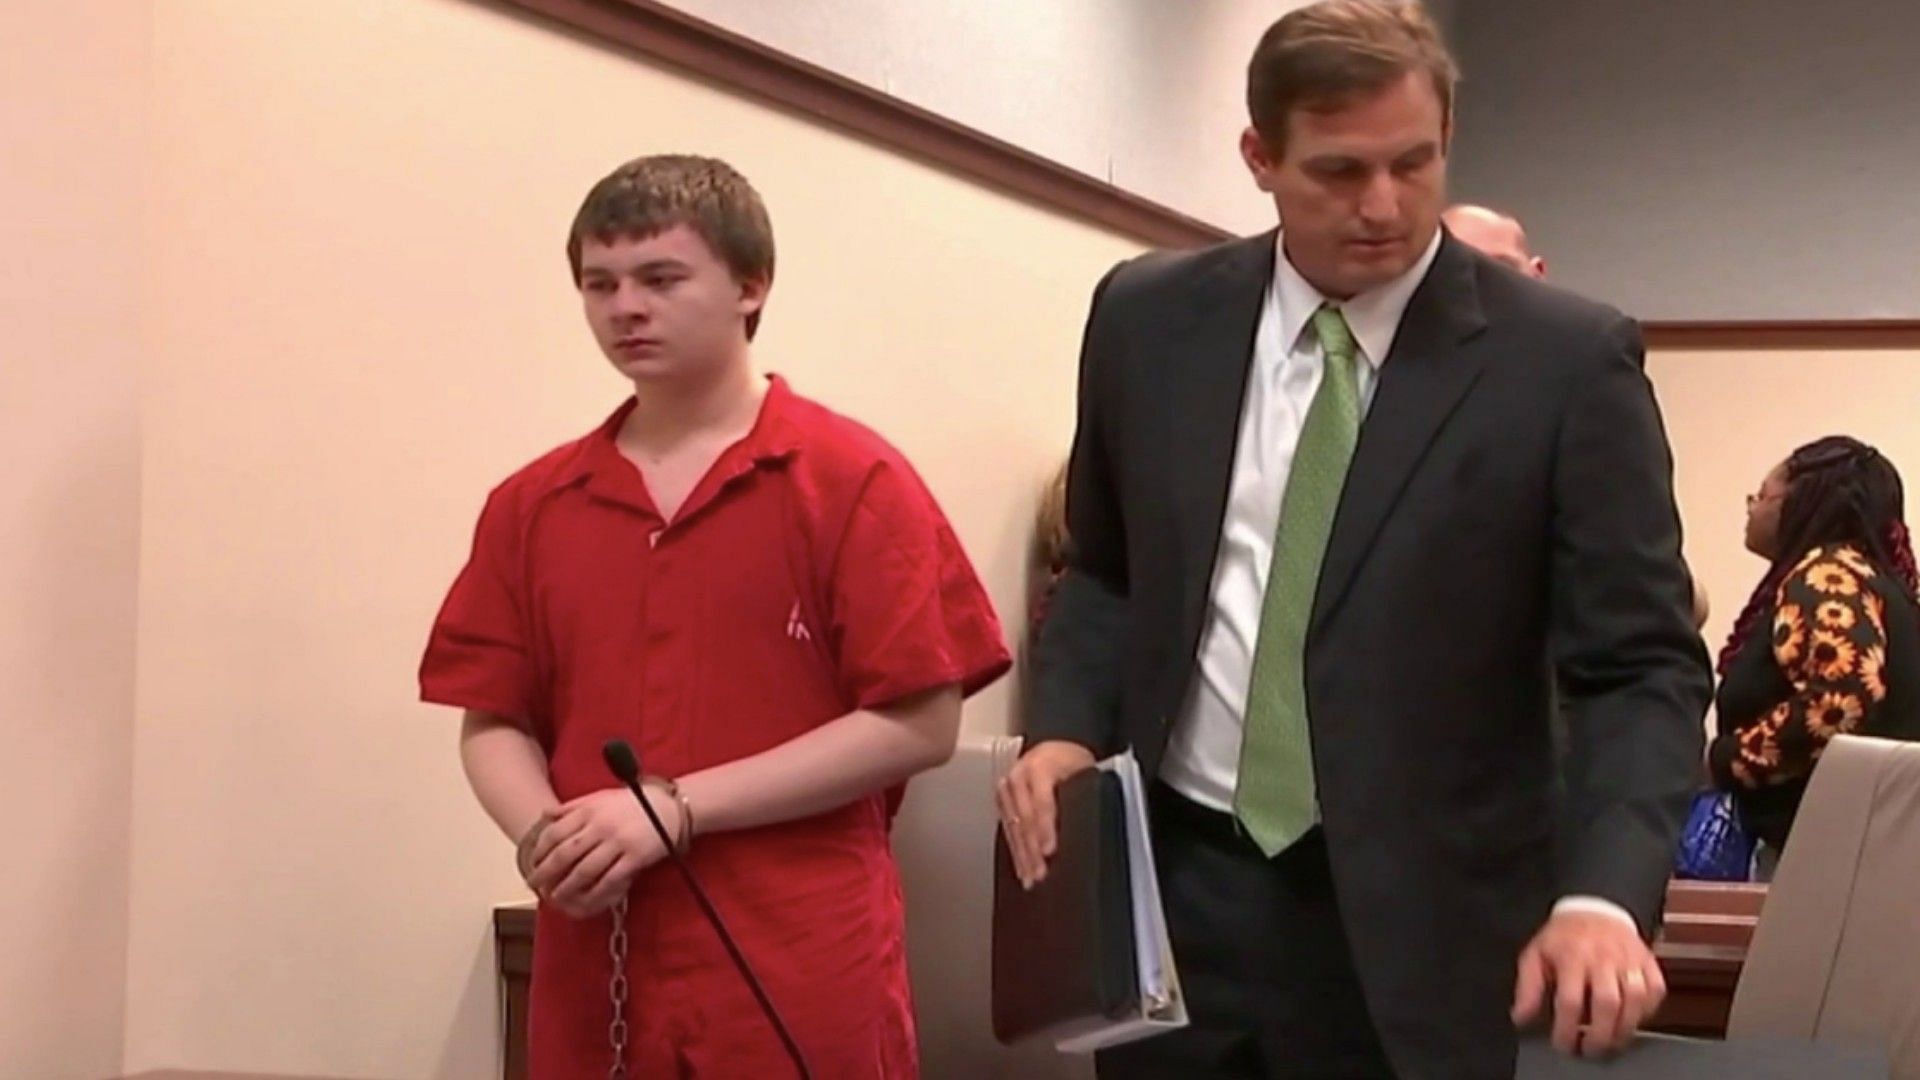 How old is Aiden Fucci? Convict sentenced to life in prison for the